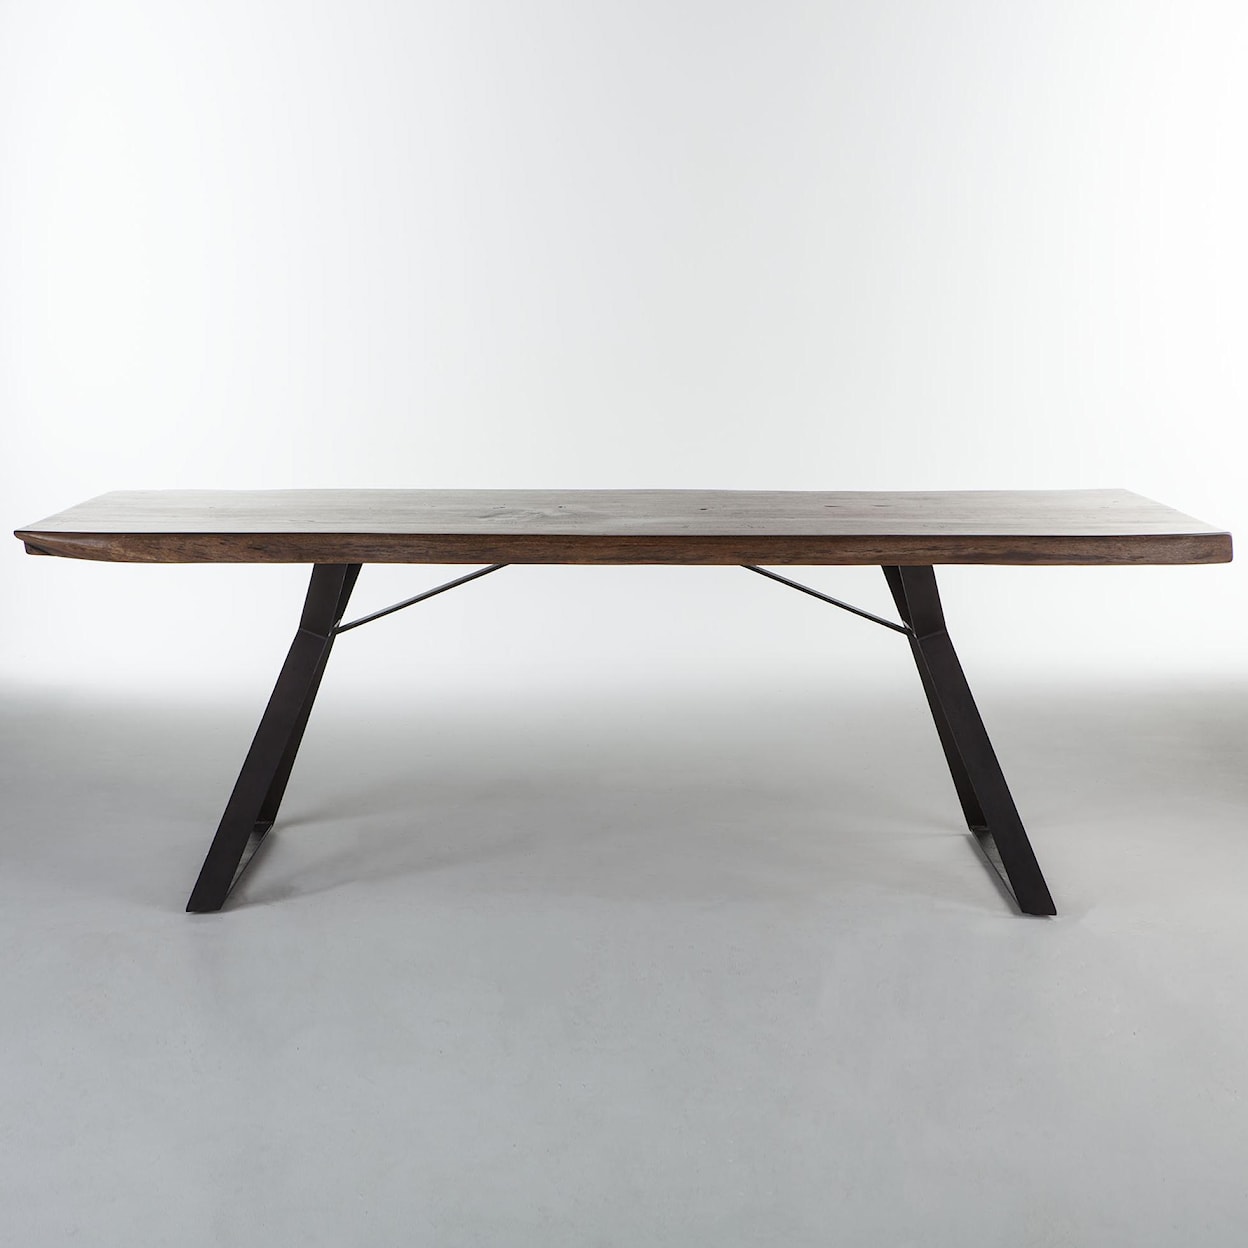 Home Trends & Design FLL 80" Wood Top Table